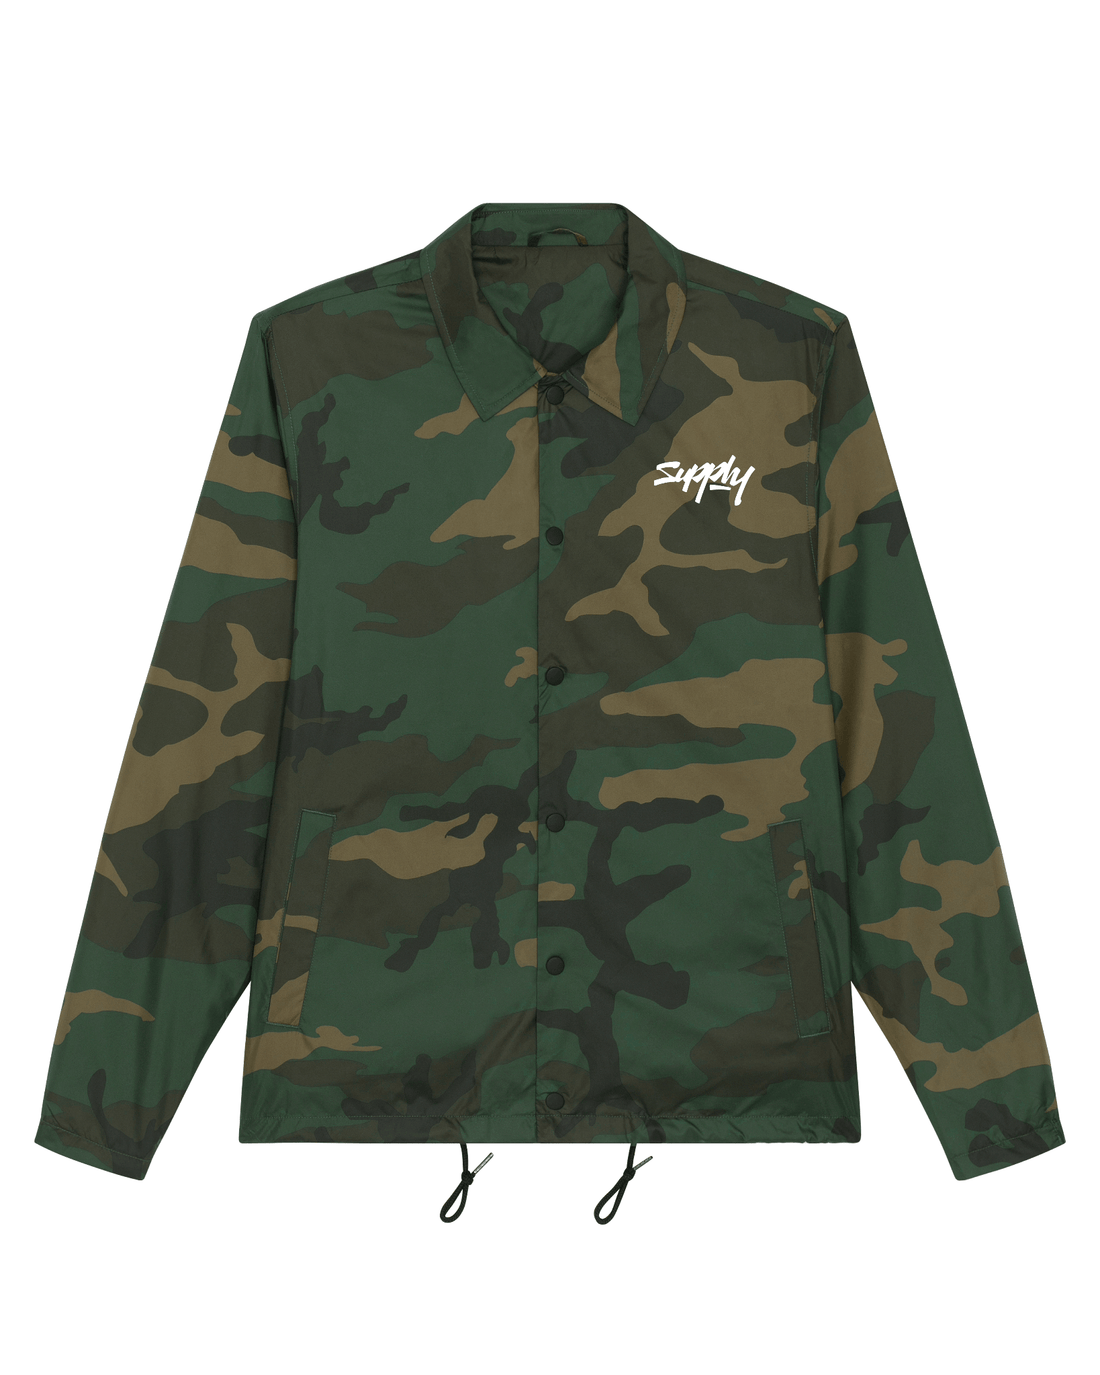 Camouflage Skater Jacket, Coach Front Print